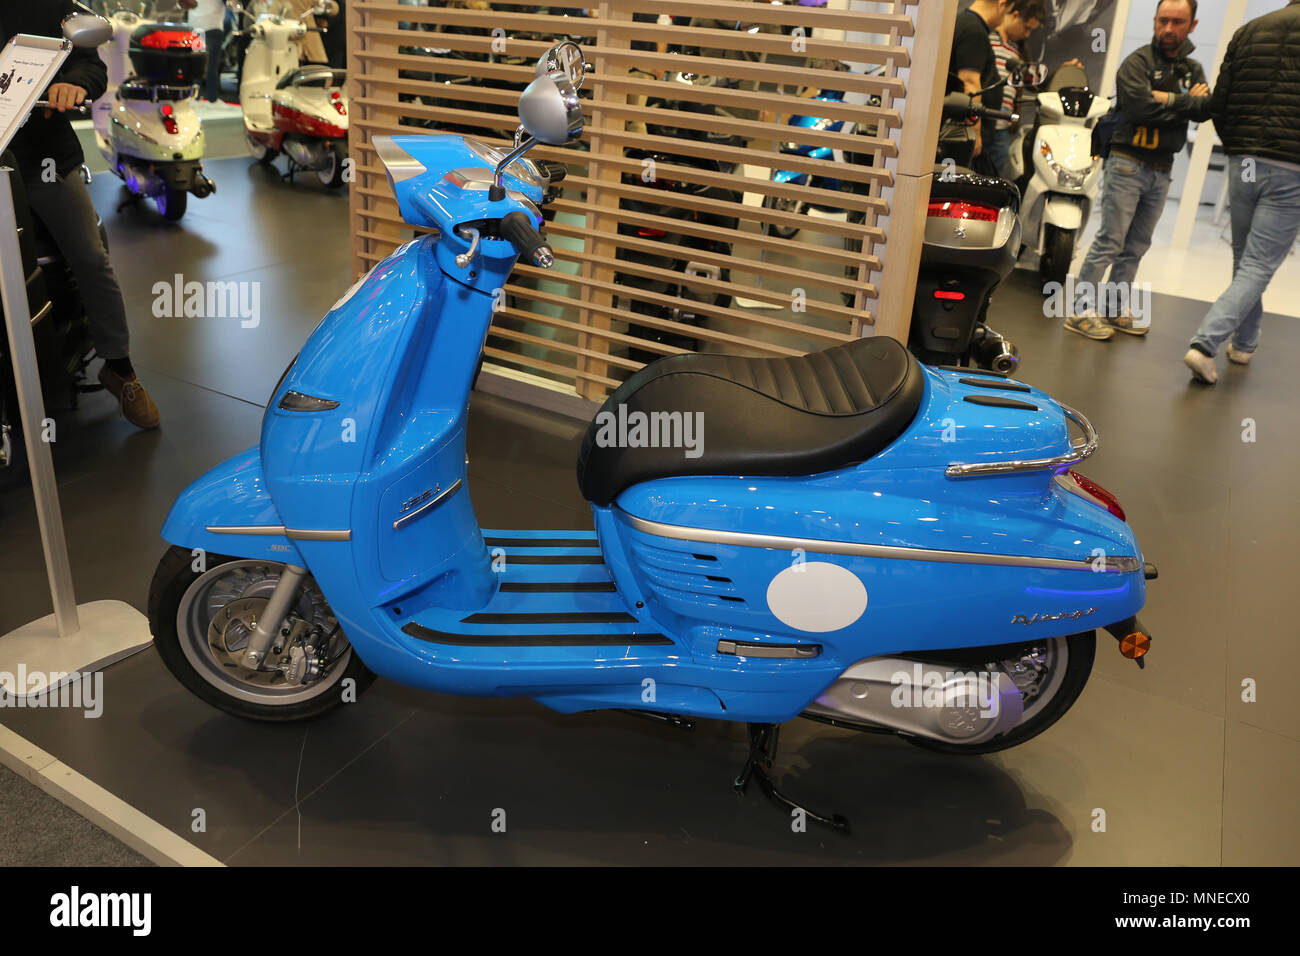 ISTANBUL, TURKEY - FEBRUARY 25, 2018: Peugeot 125i Scooter on display at  Motobike Istanbul in Istanbul Exhibition Center Stock Photo - Alamy